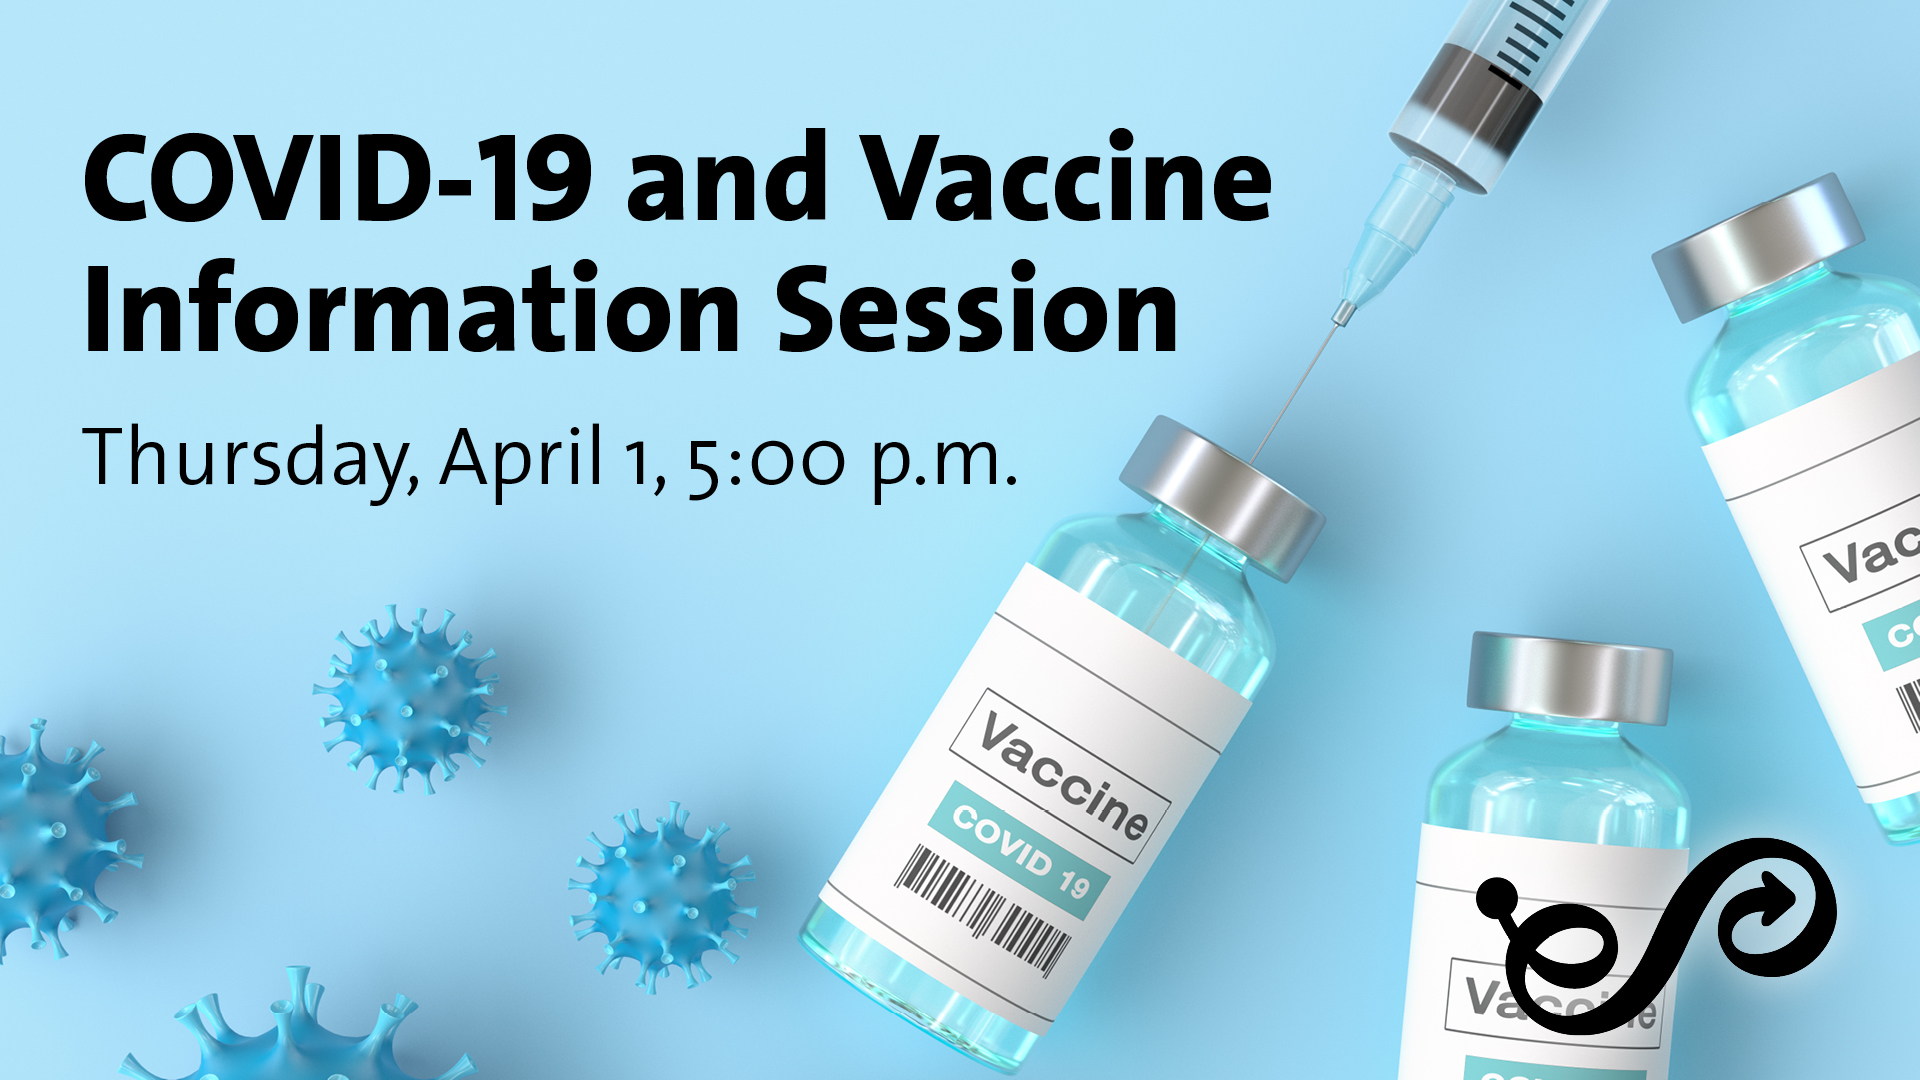 COVID-19 and Vaccine Information Session, Thursday April 1 at 5 PM